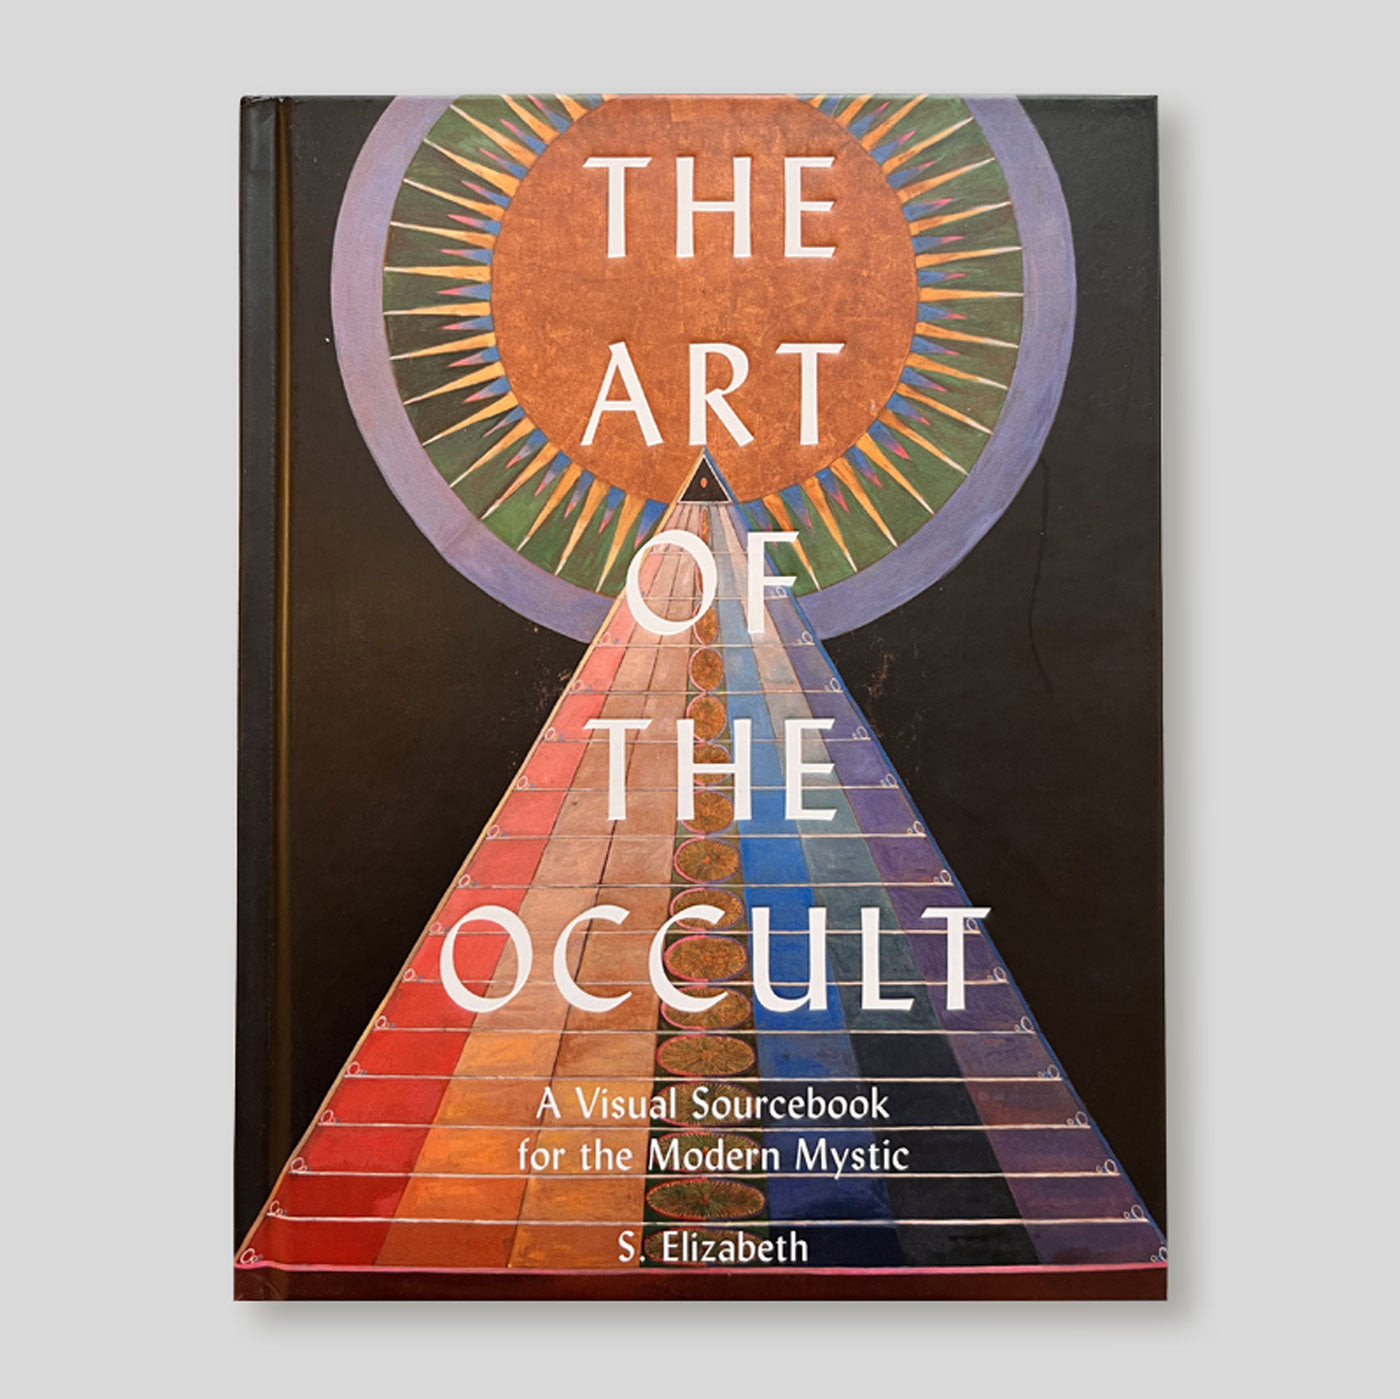 The Art of the Occult by S. Elizabeth, Quarto At A Glance